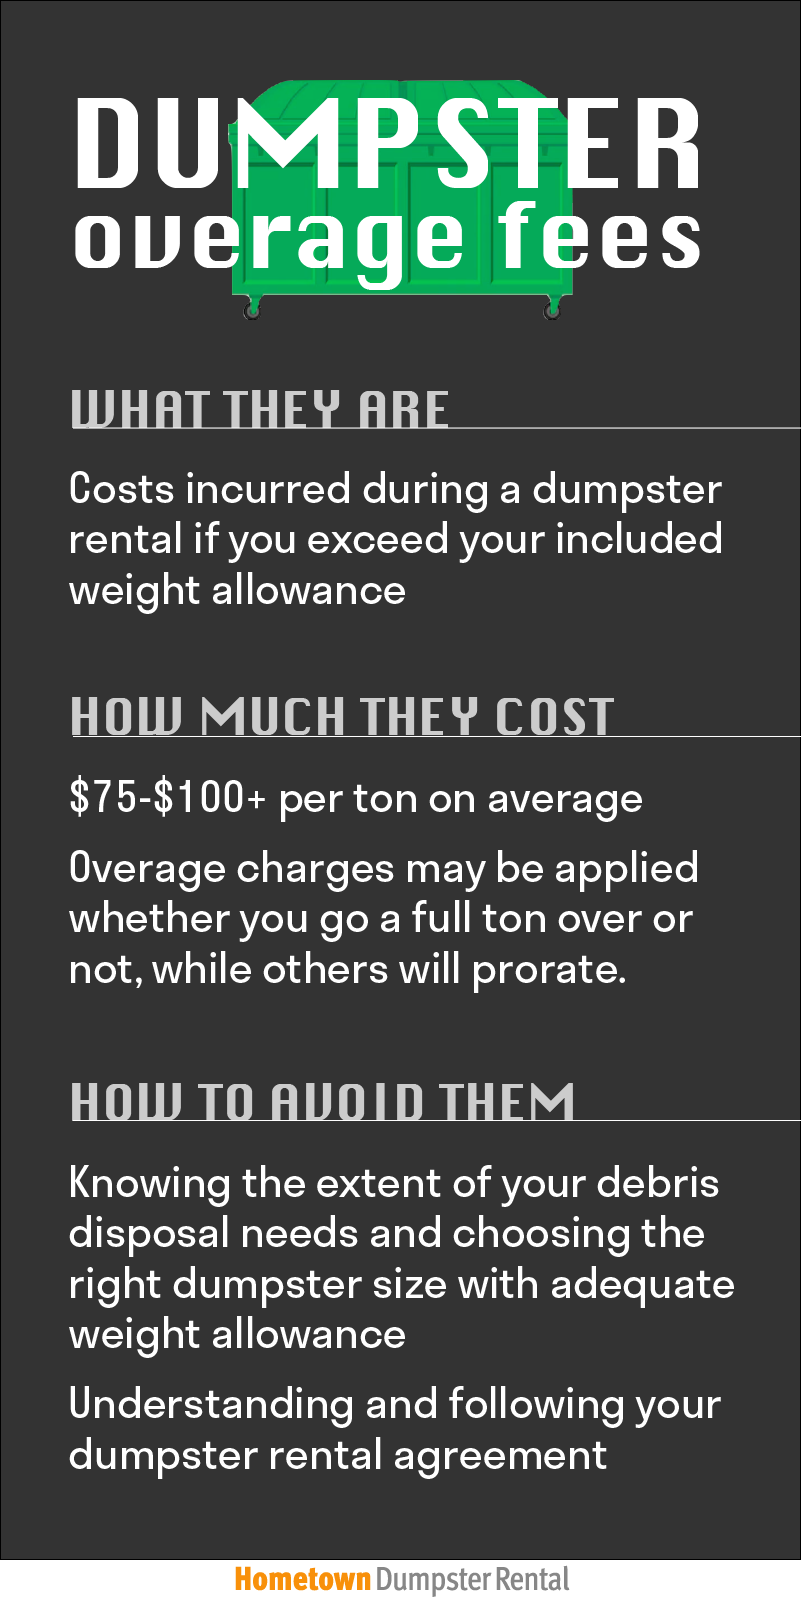 dumpster overage fees infographic